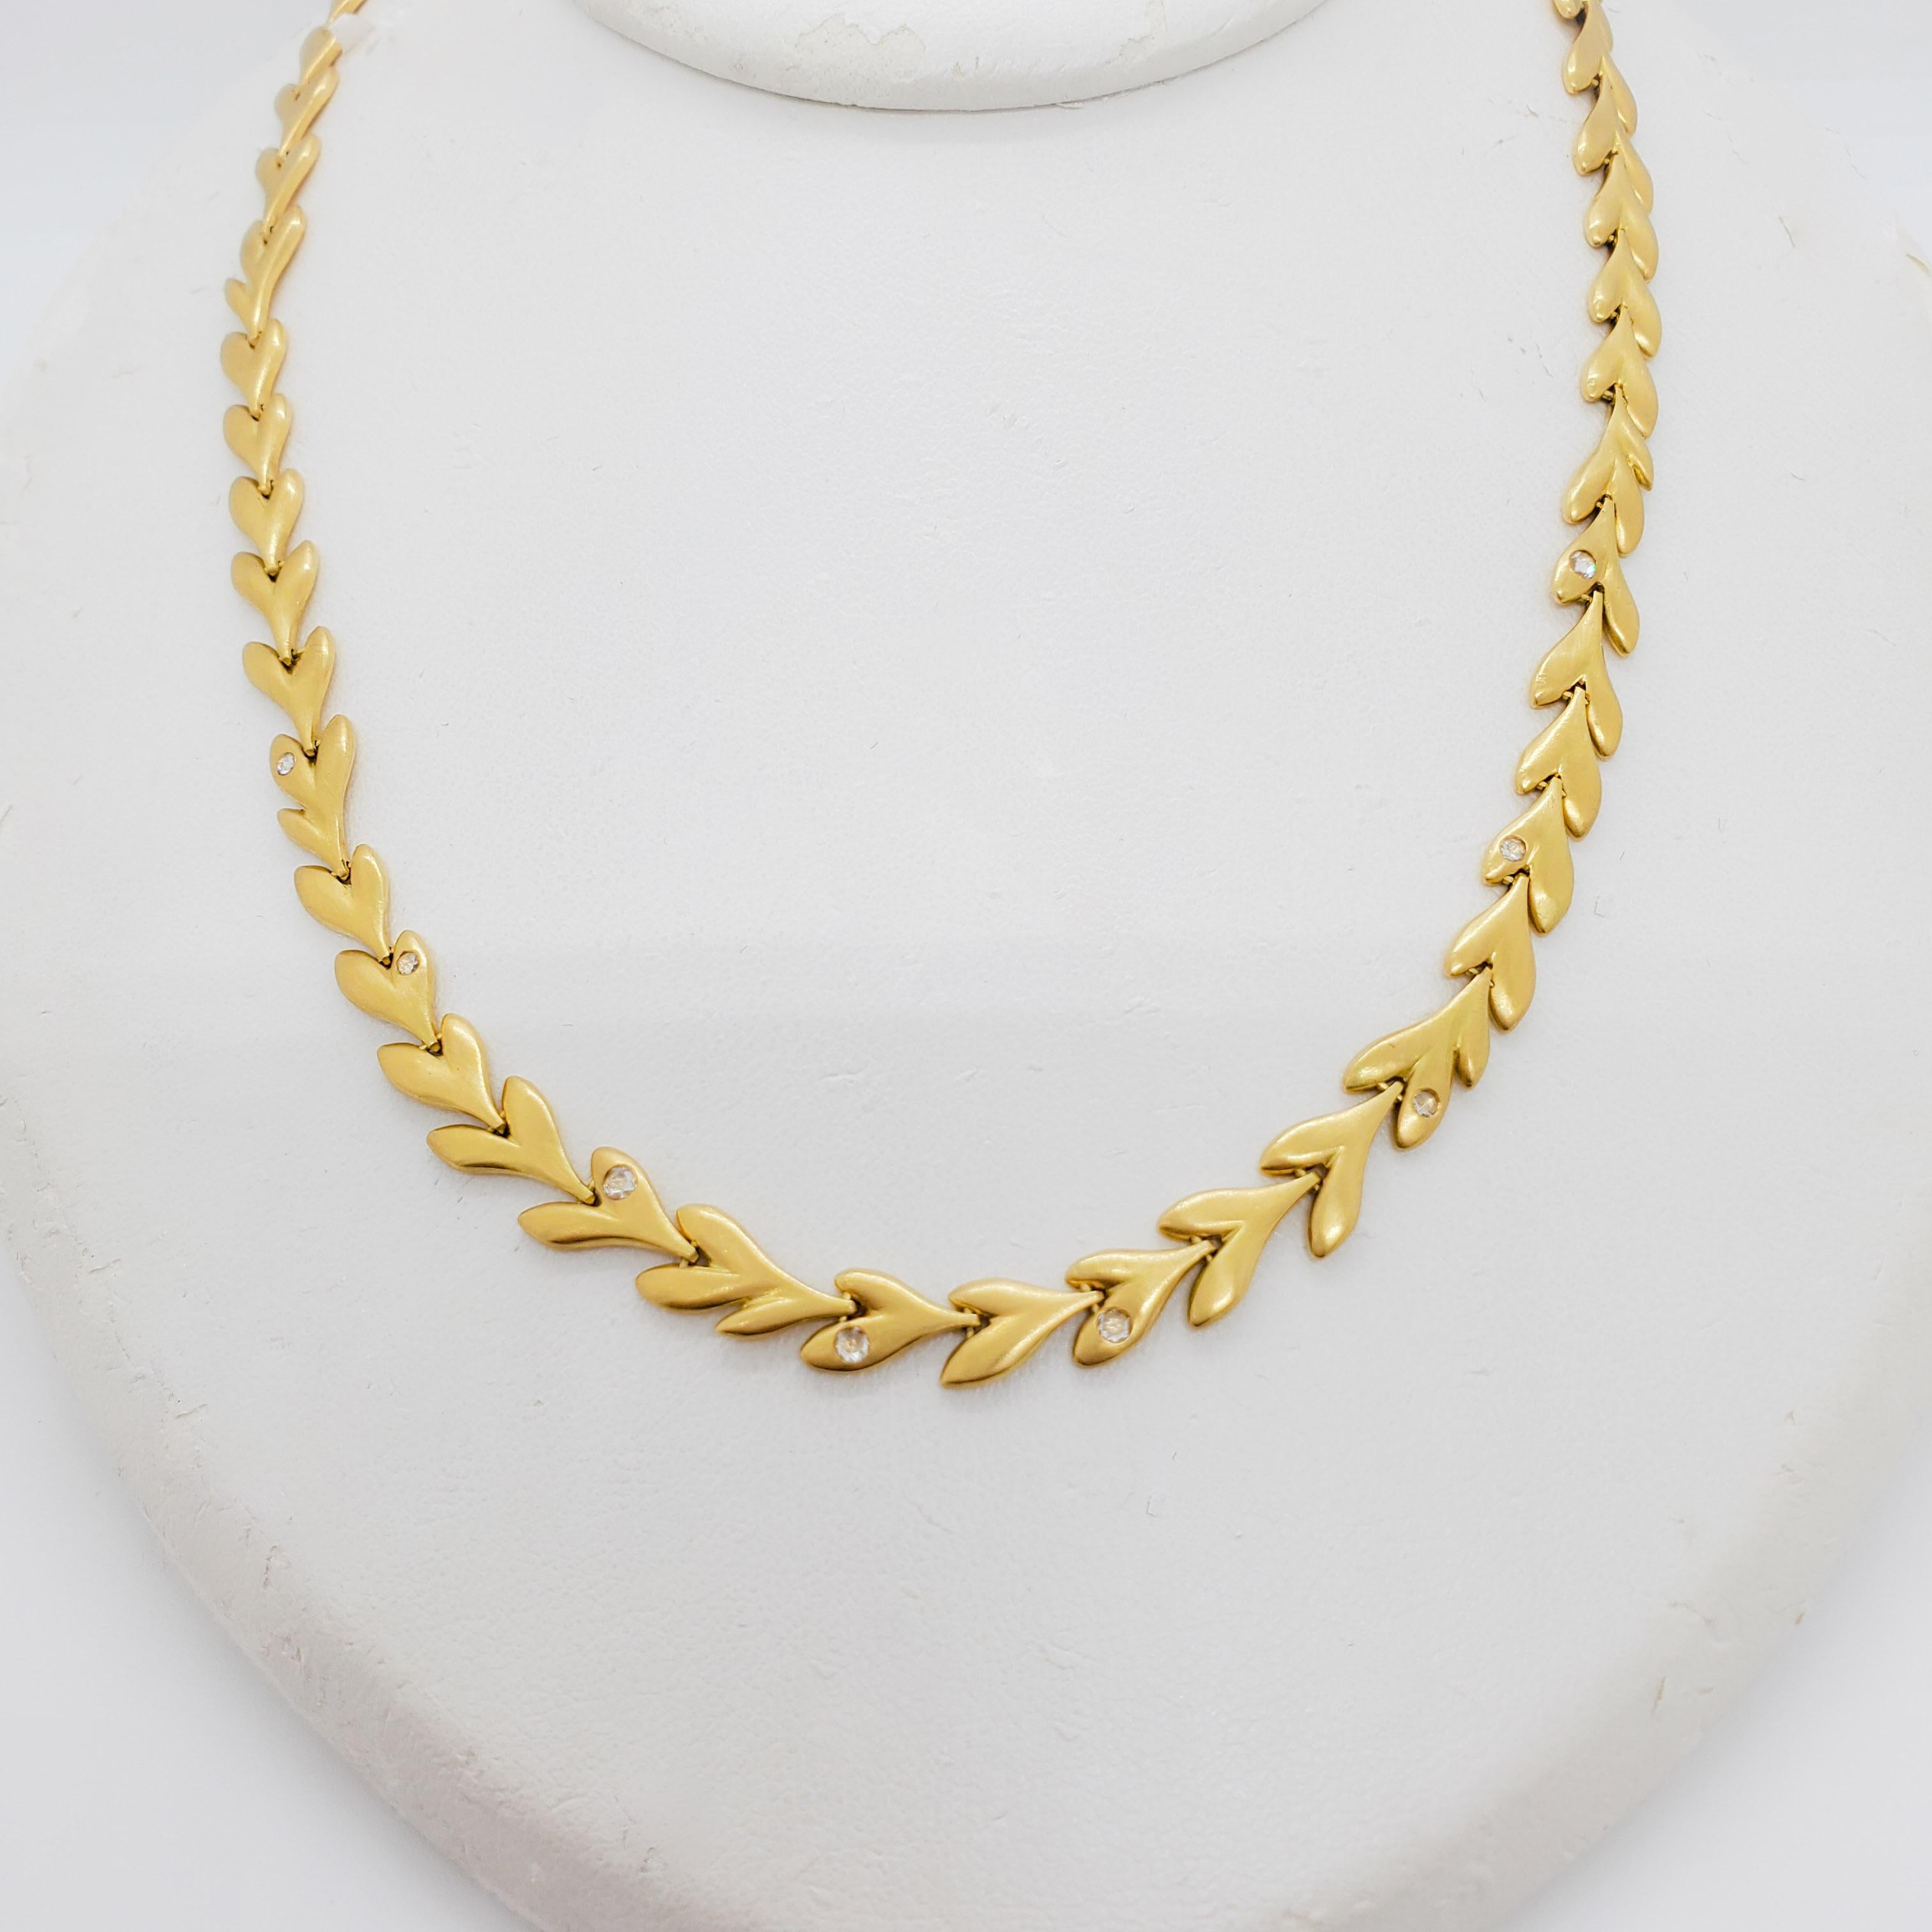 Beautiful H. Stern necklace with gold hearts and some small diamond rounds throughout.  Handmade in 18k yellow gold.